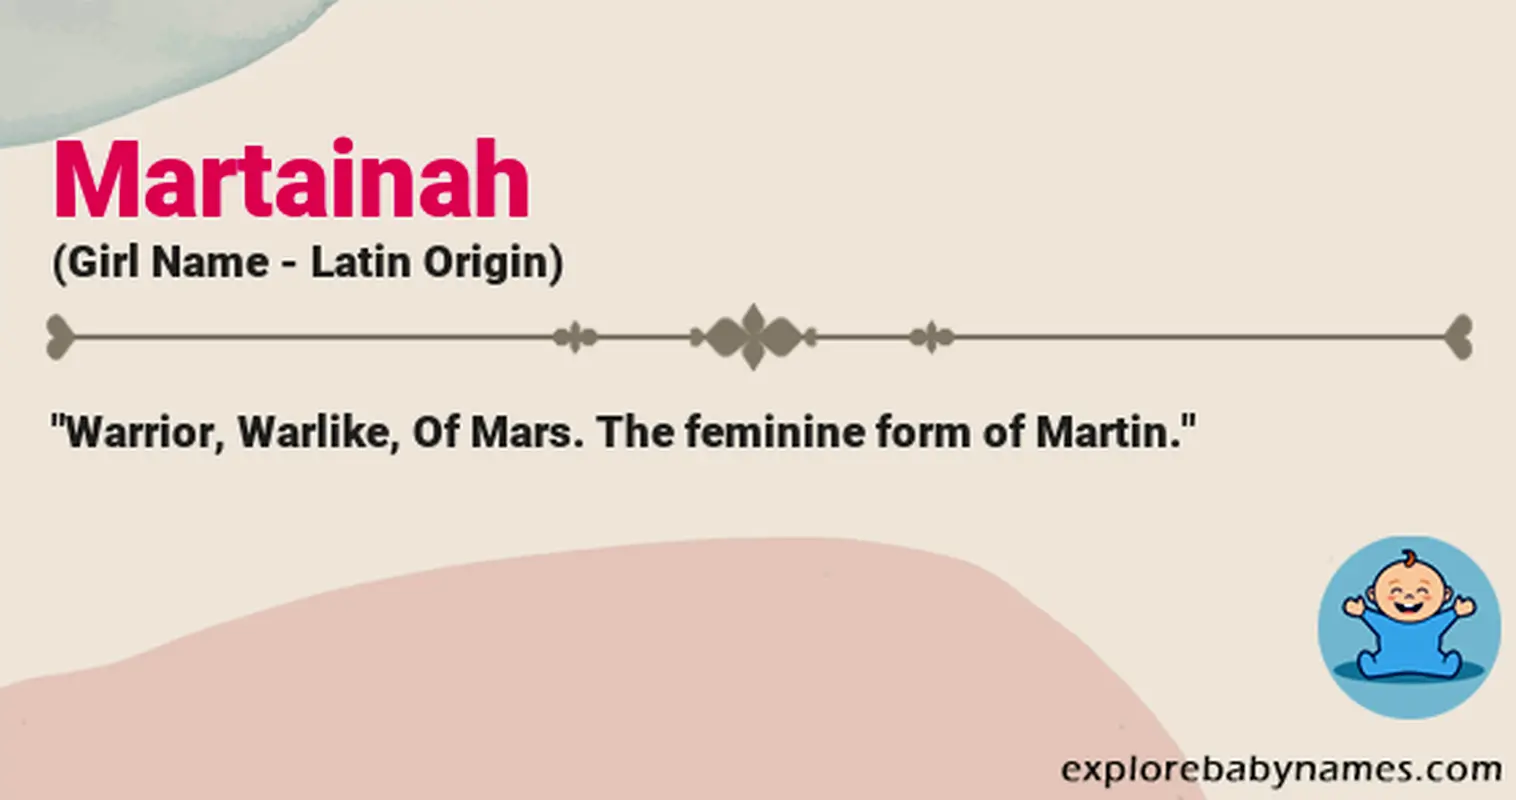 Meaning of Martainah